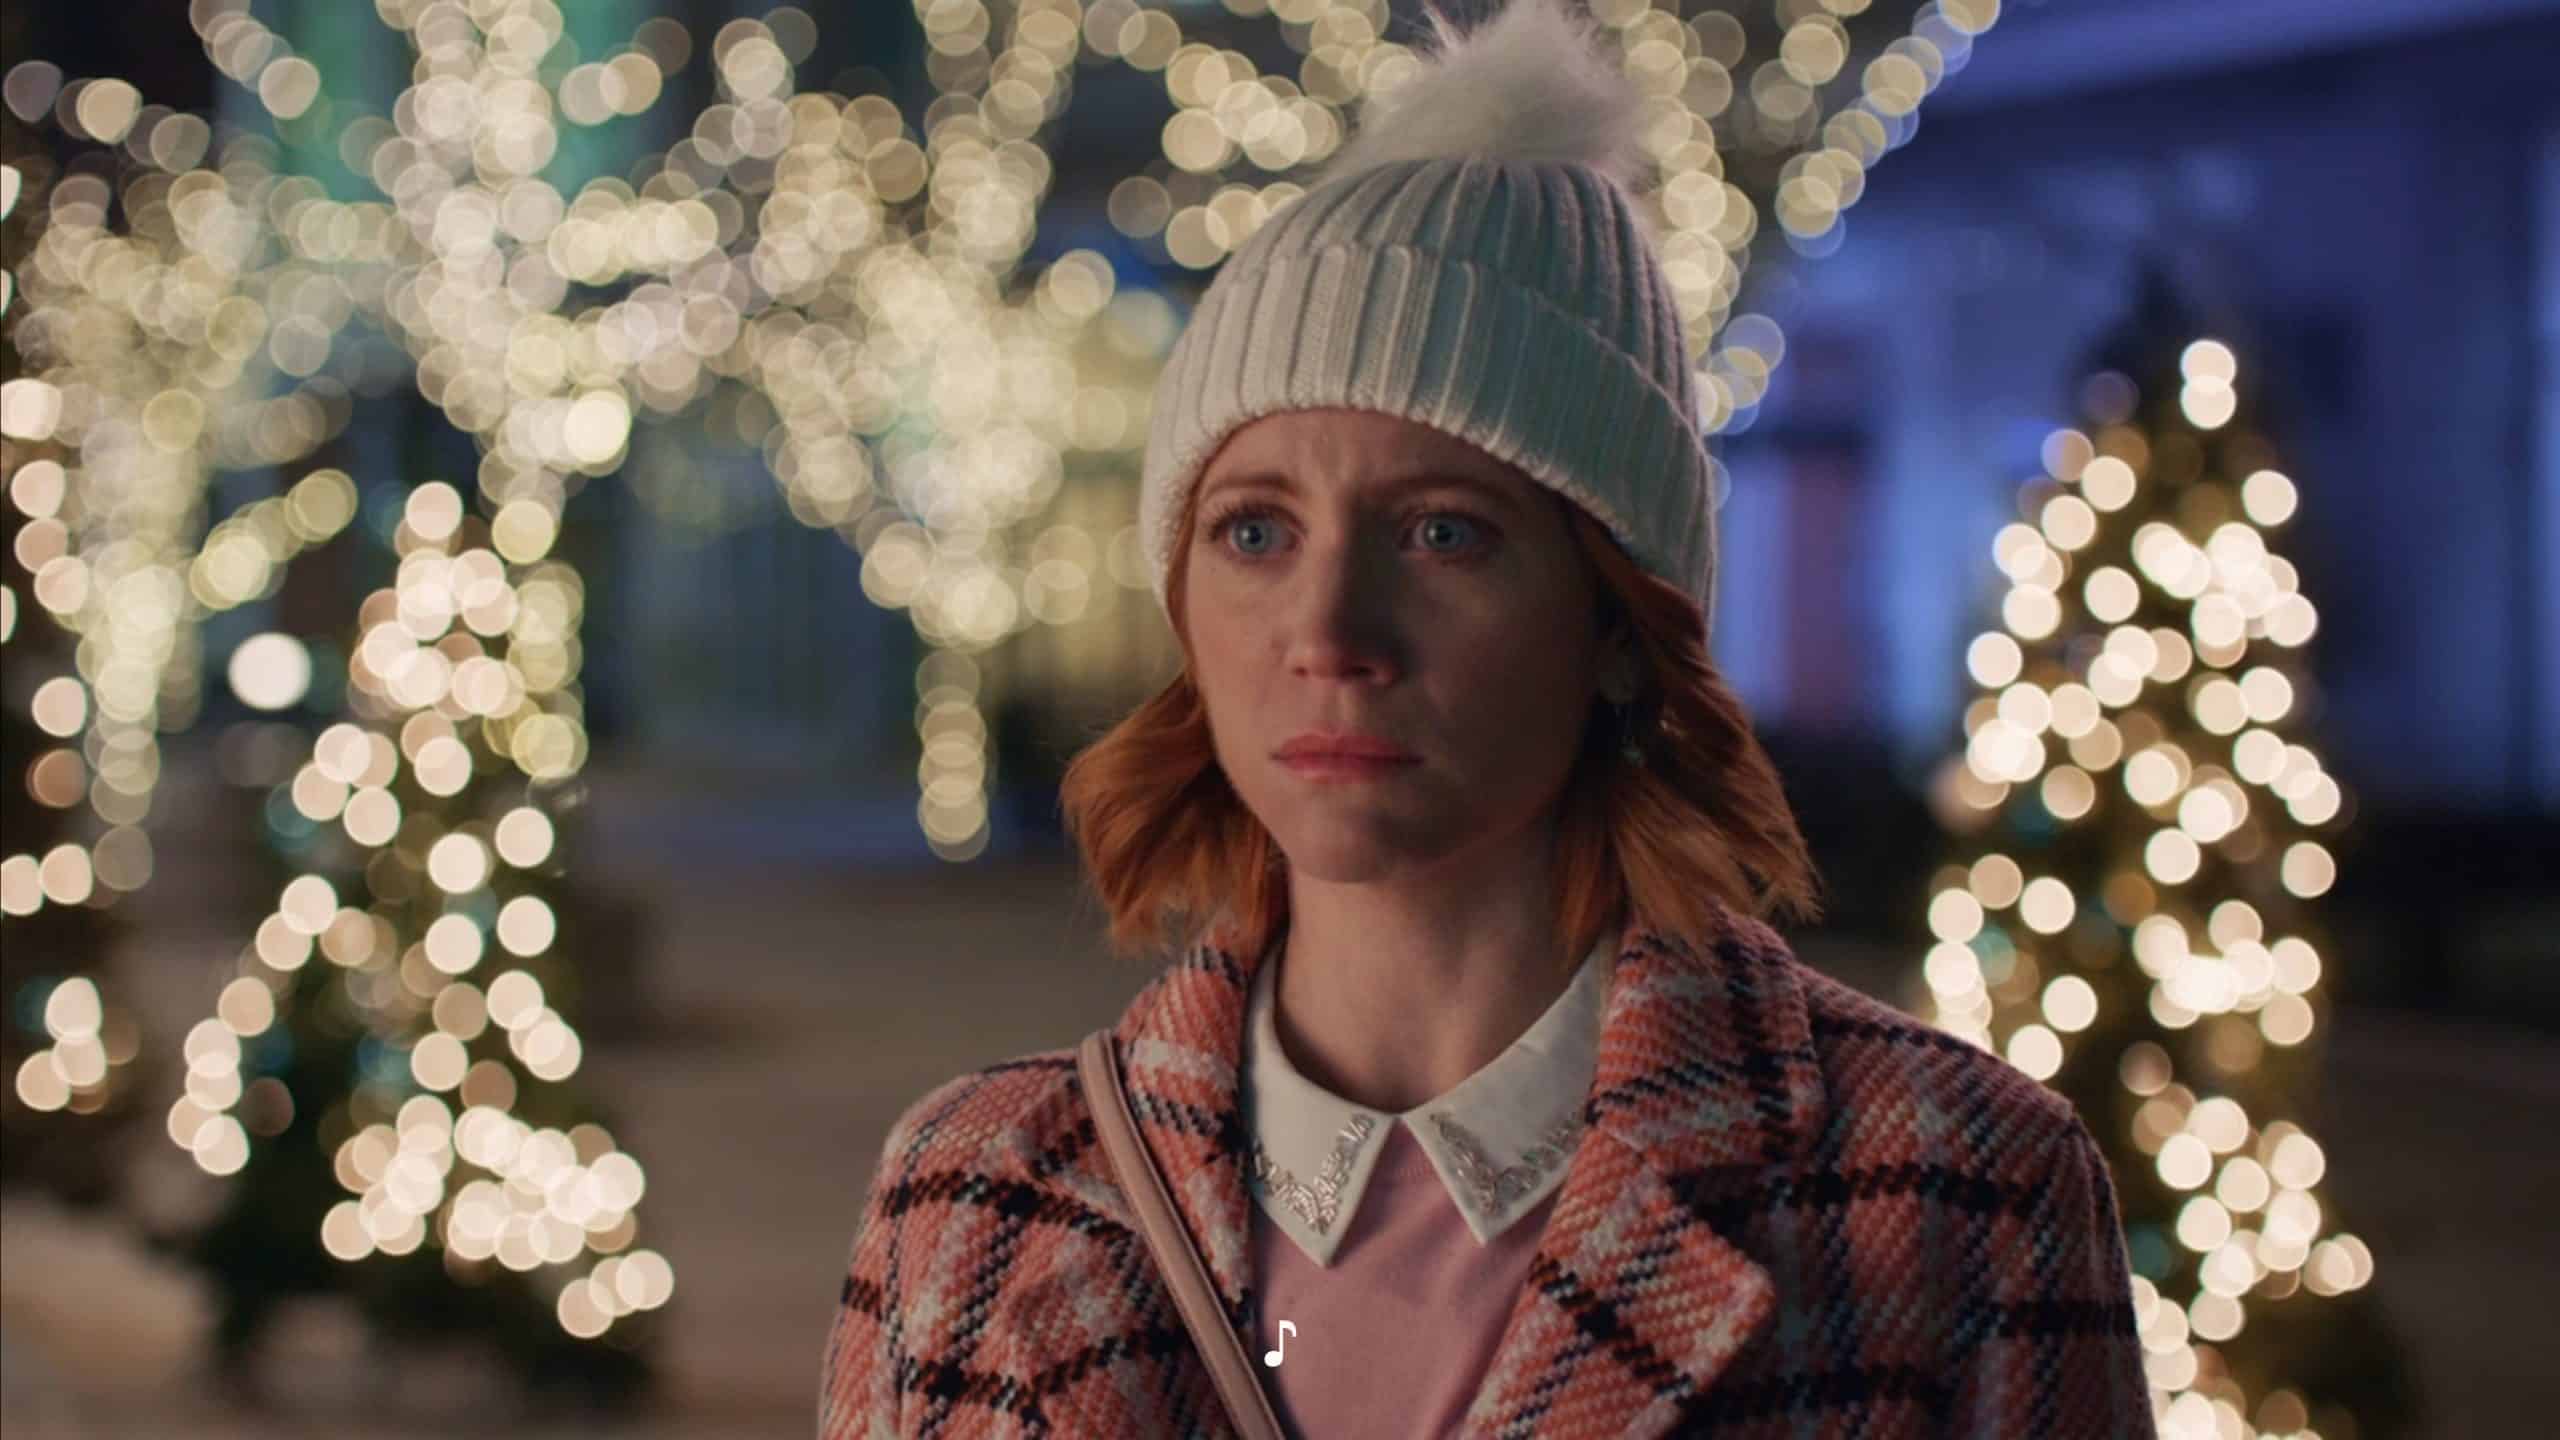 Jesse (Brittany Snow) reacting to being broken up with